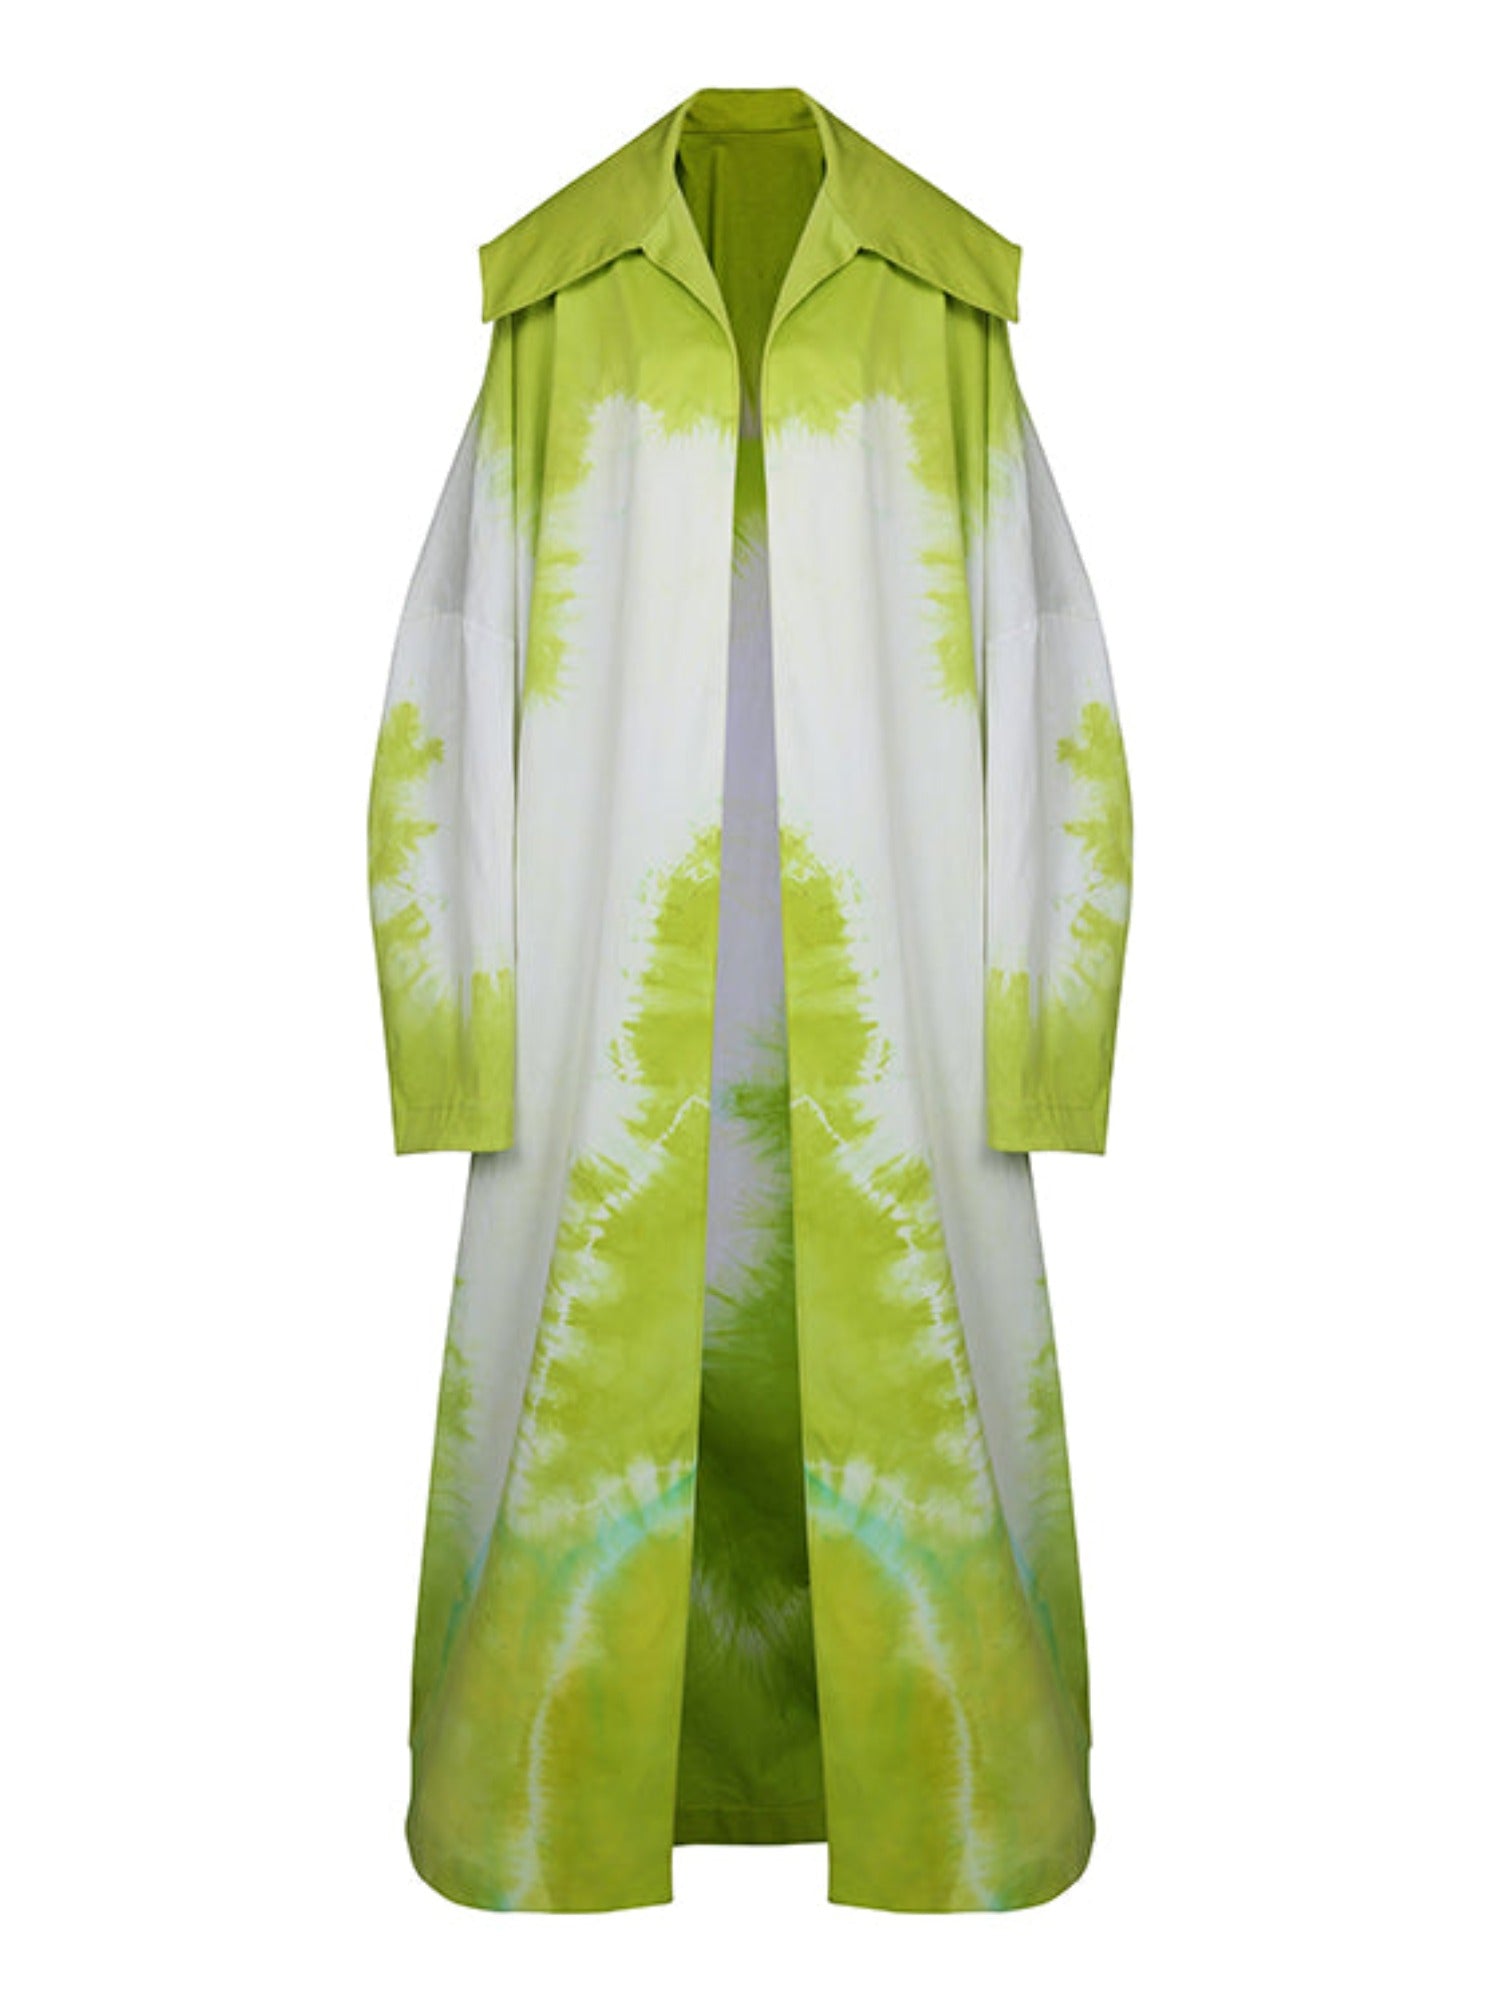 Lime tie-dye on white cotton duster coat